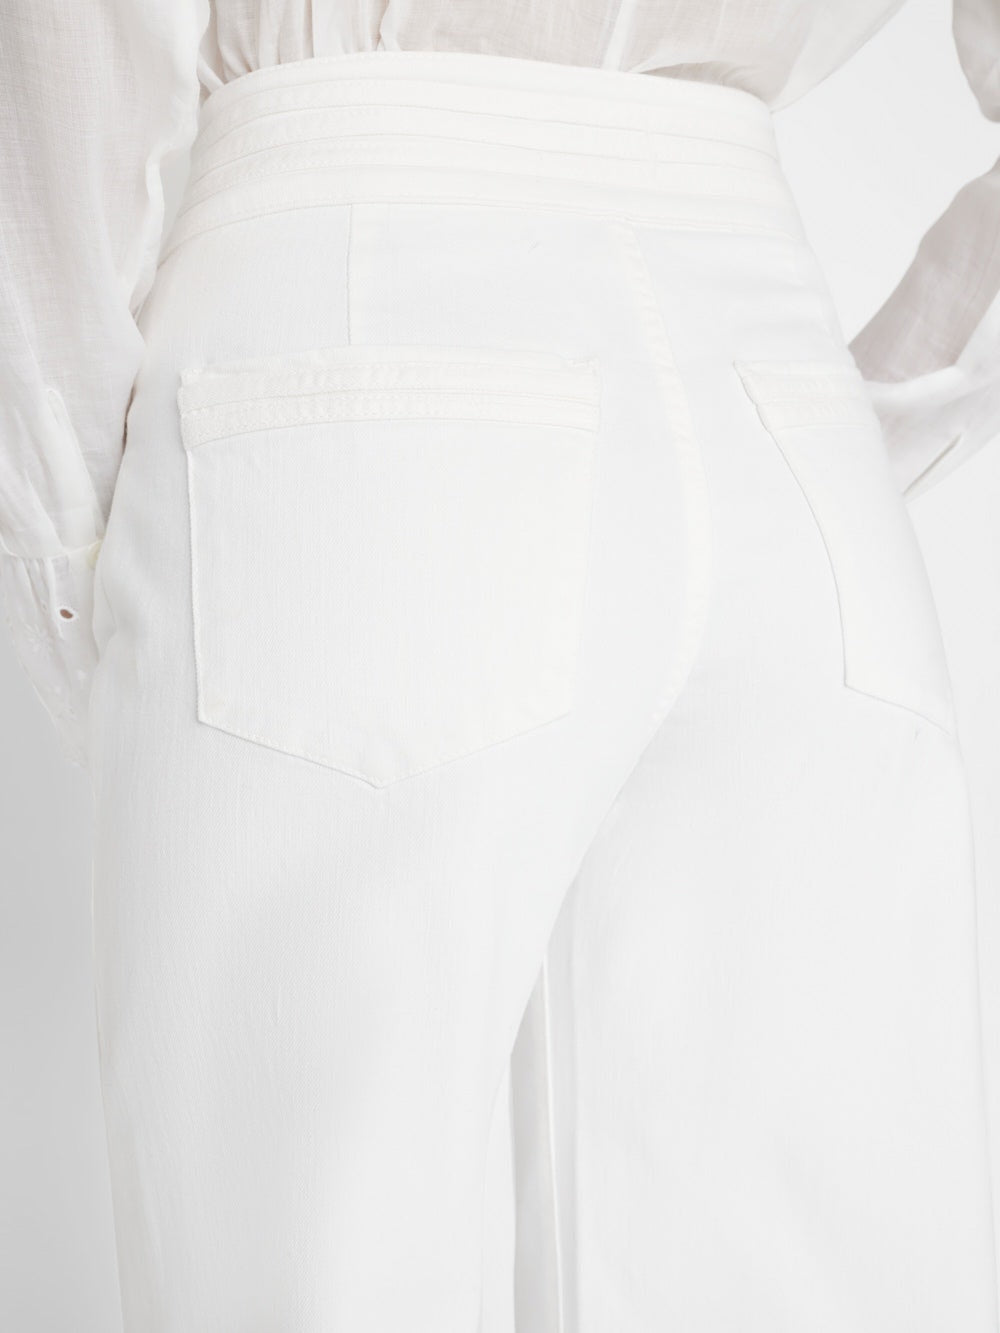 The Frame Triple Stitch Wide Leg - Blanc, a high-rise wide-leg jean in premium super stretch denim, showcasing a double-button waistband, is designed with a classic white hue that beautifully enhances the allure of a woman's back.